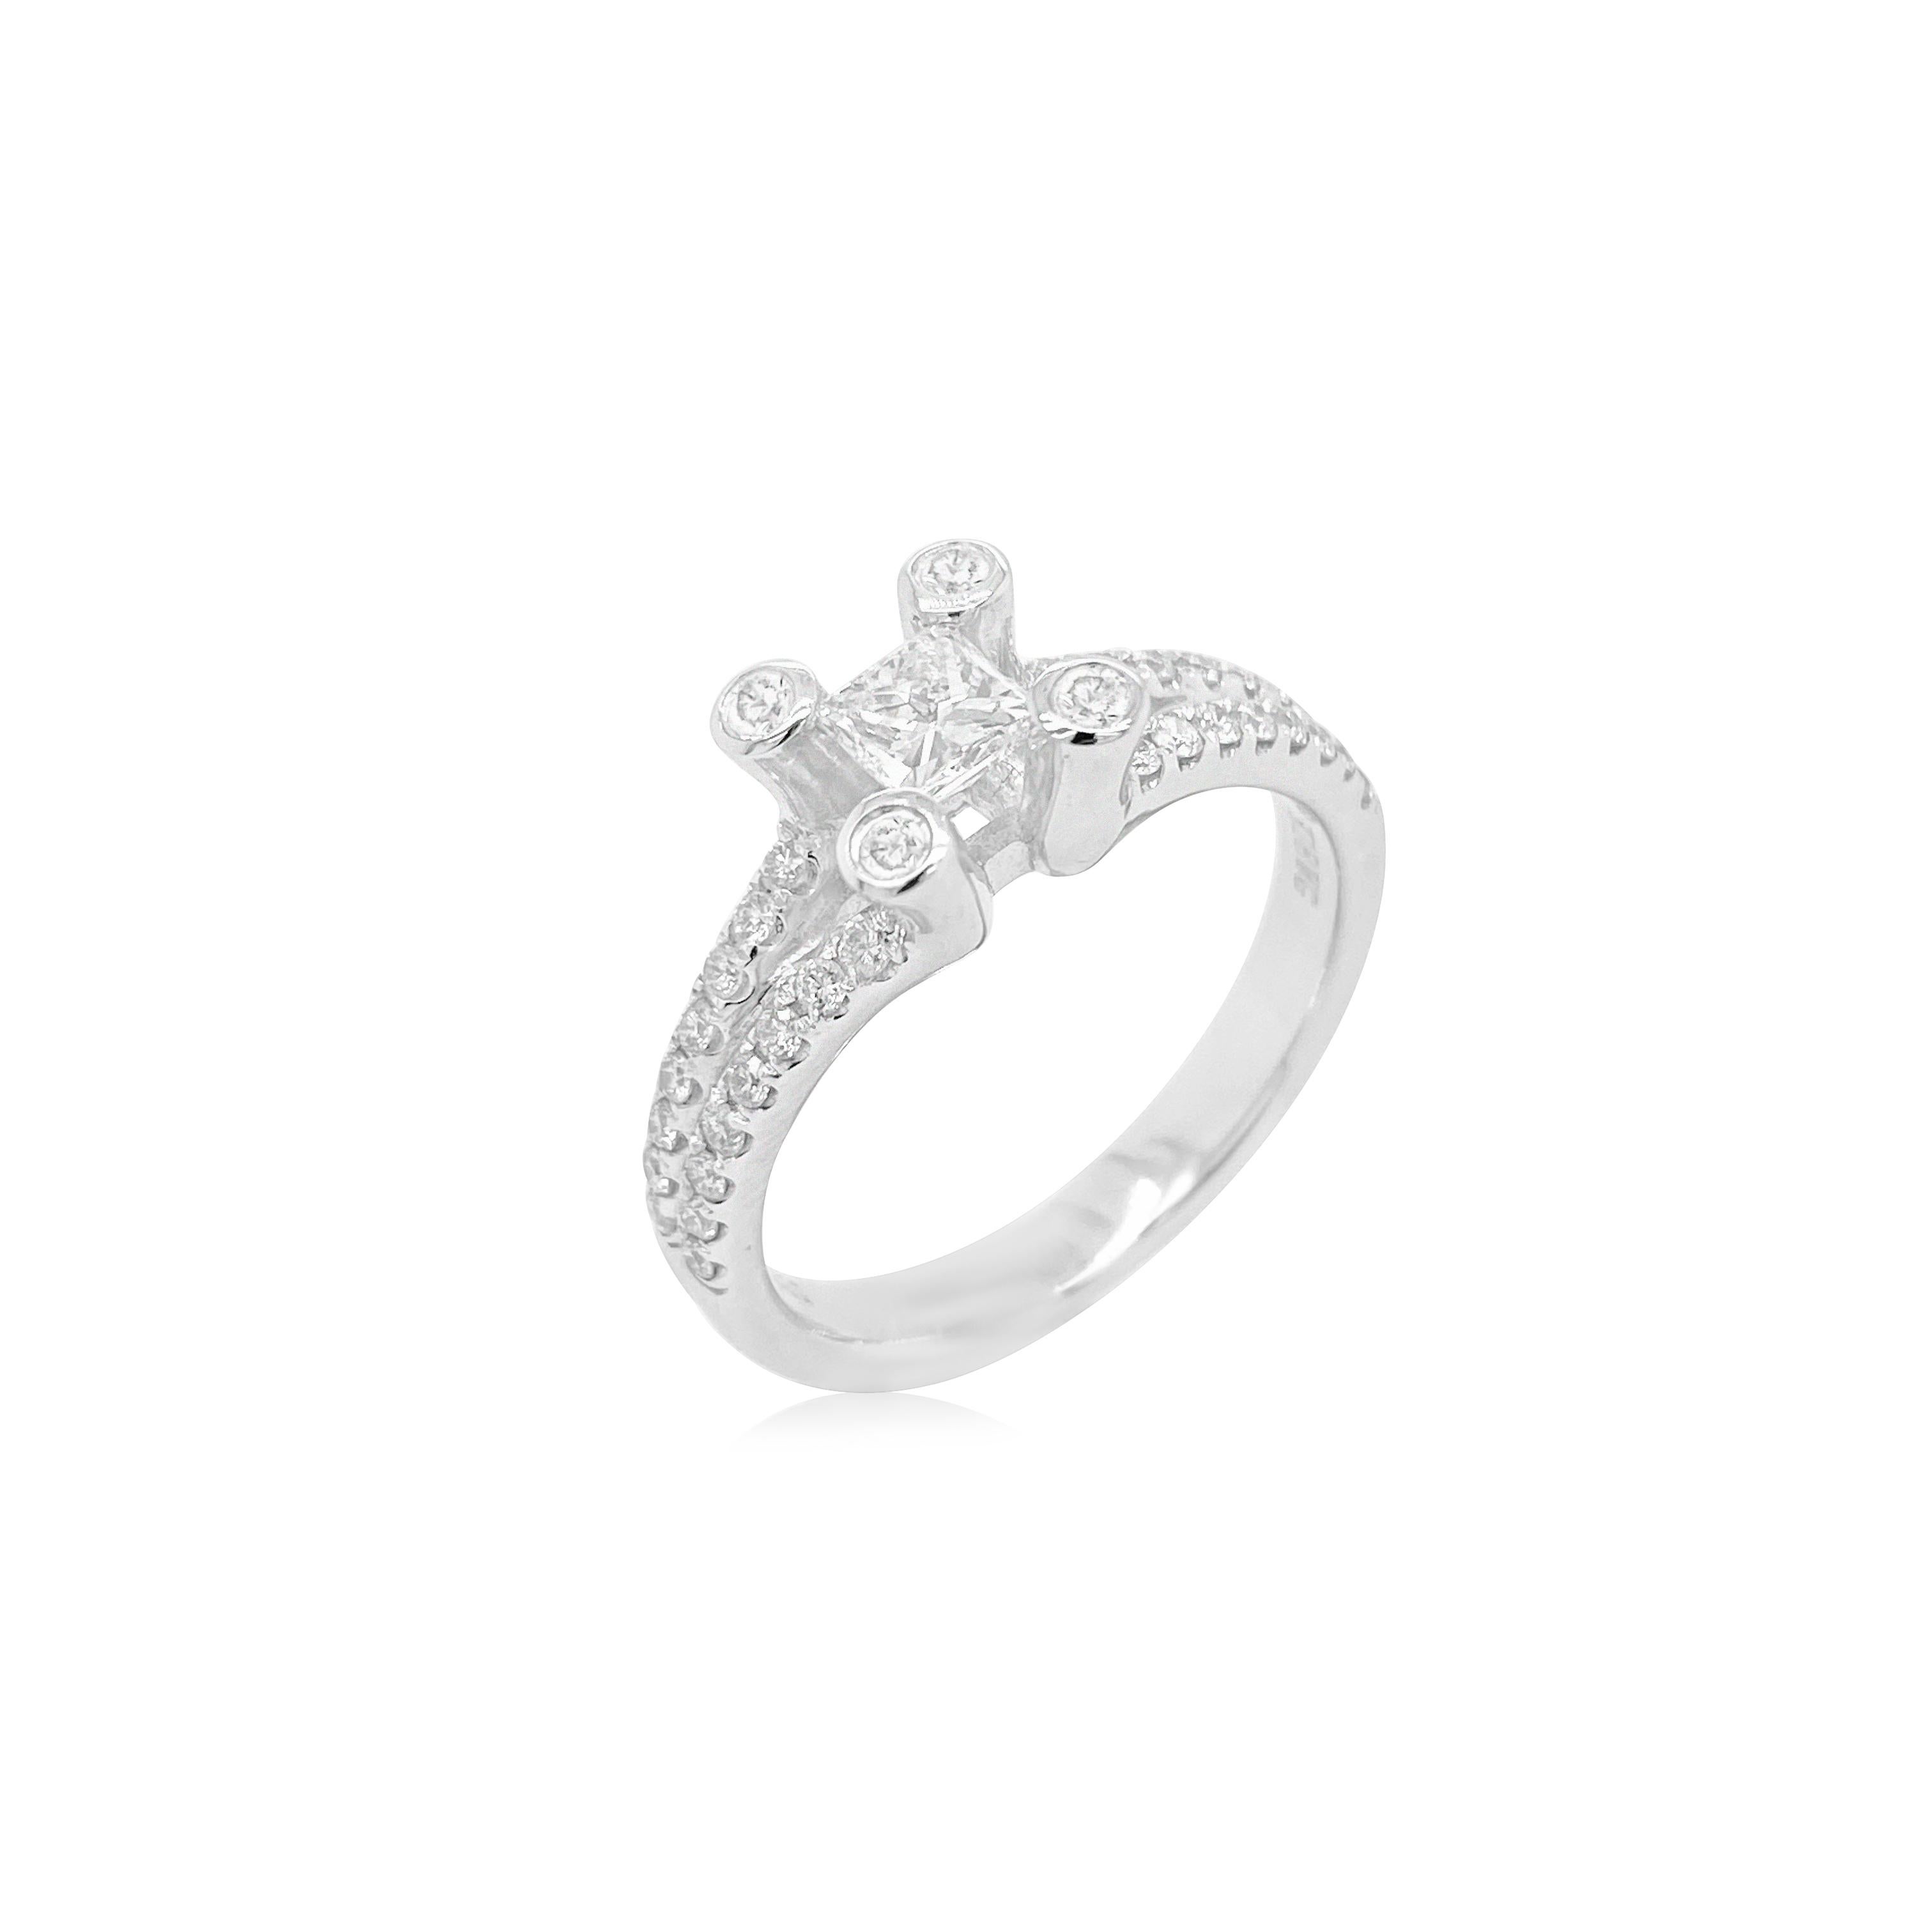 This classic White diamond Ring is a perfect everyday jewellery with high quality Princess cut diamond and round brilliant cut white diamonds crafted in 18K white gold 

-	Princess  Cut White Diamonds total 0.30 carat
-	Round Brilliant Cut White